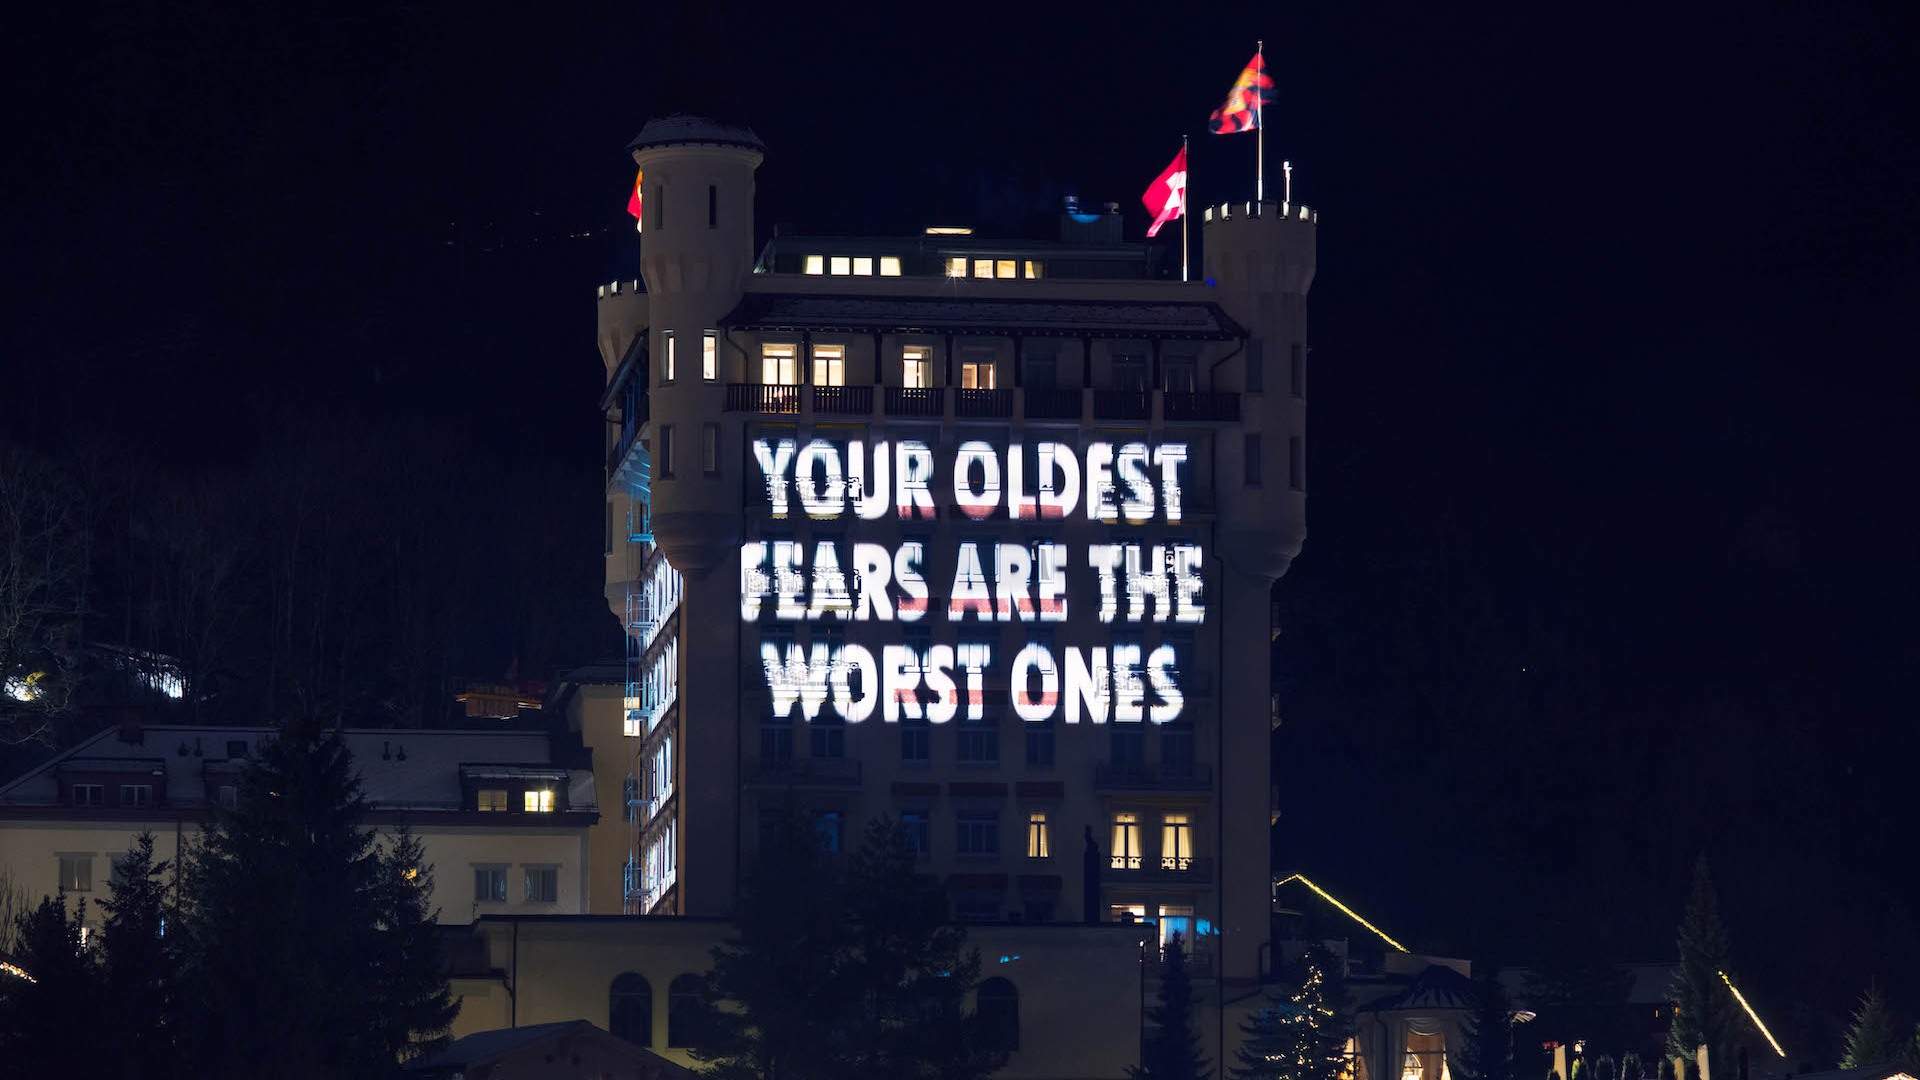 Iconic New York Artist Jenny Holzer Is Bringing Giant, Building-Sized Text Projections to Rising